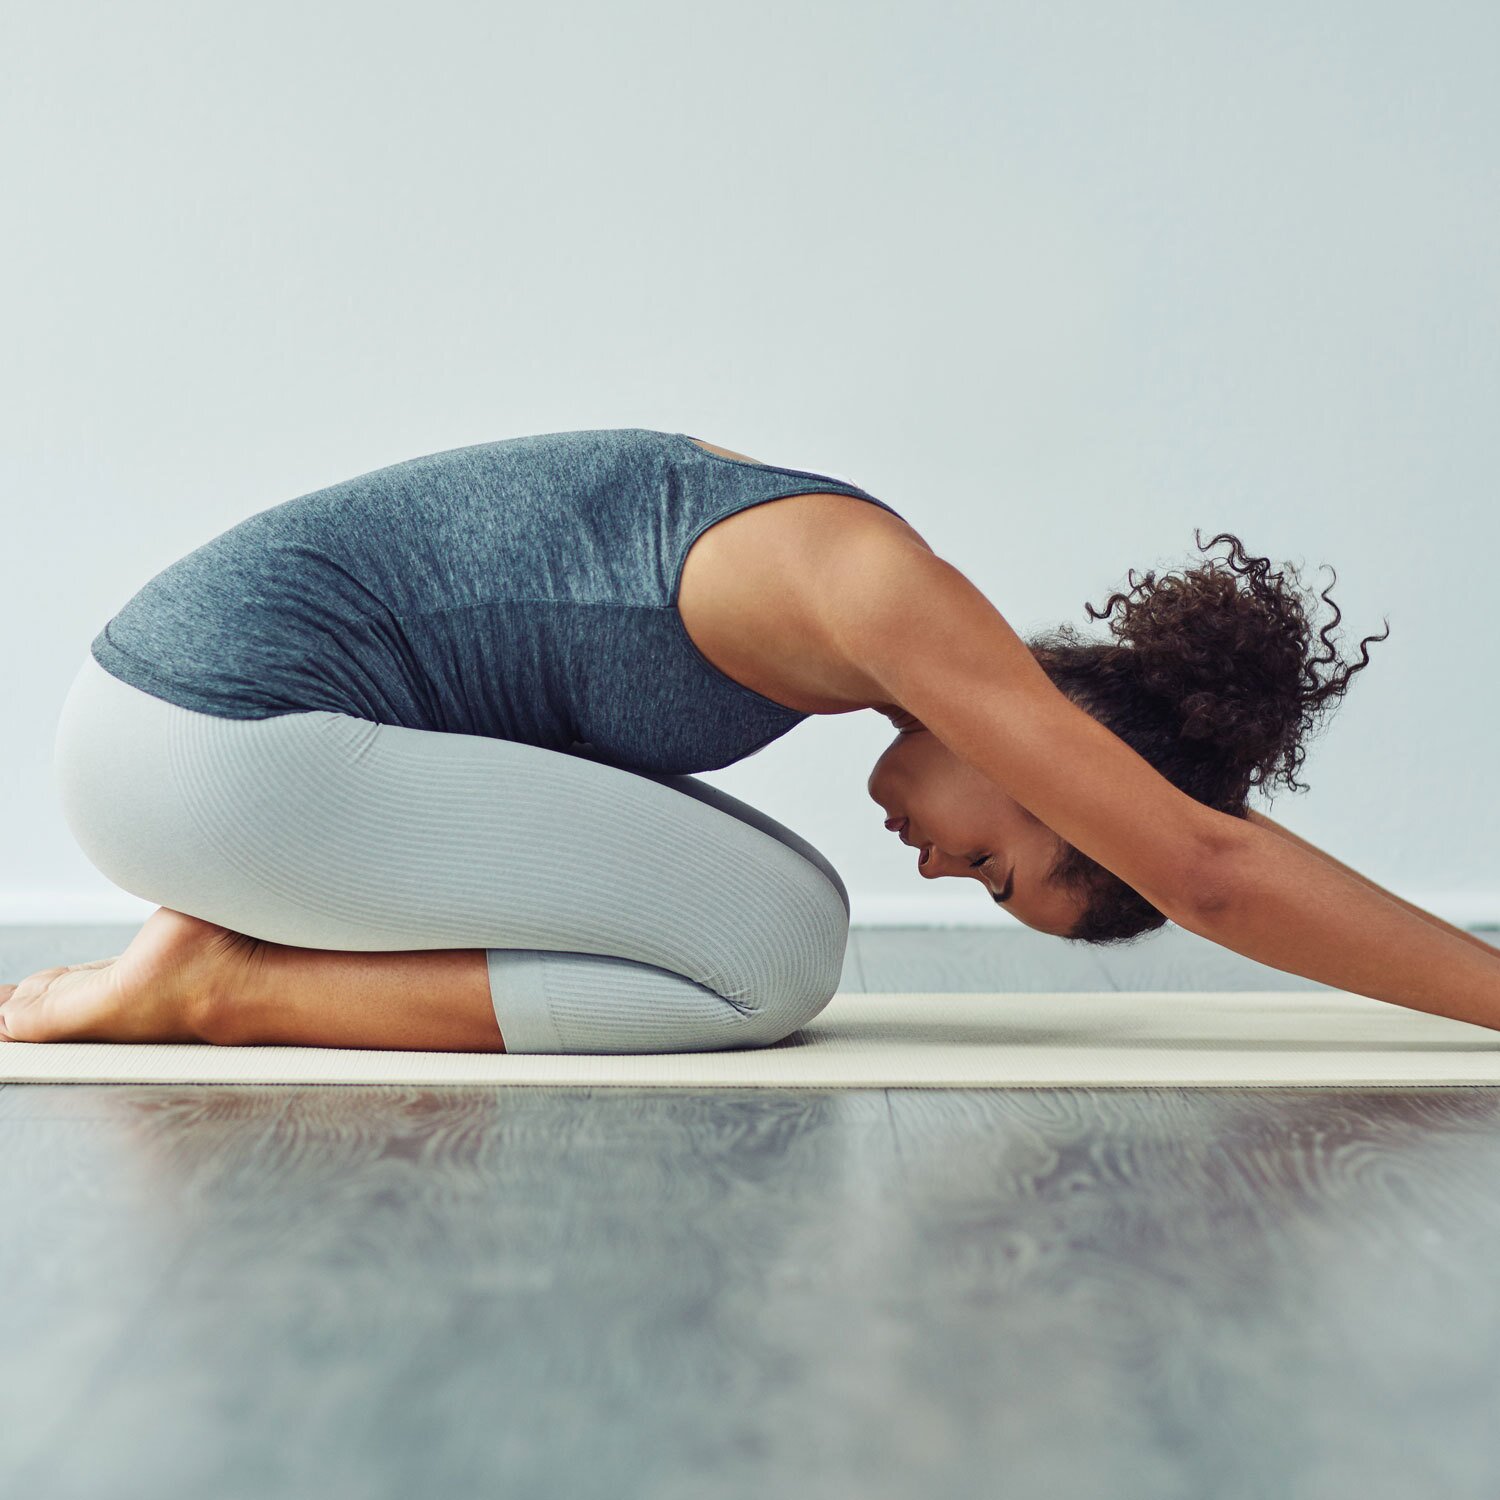 5 Hot Yoga Poses For Women